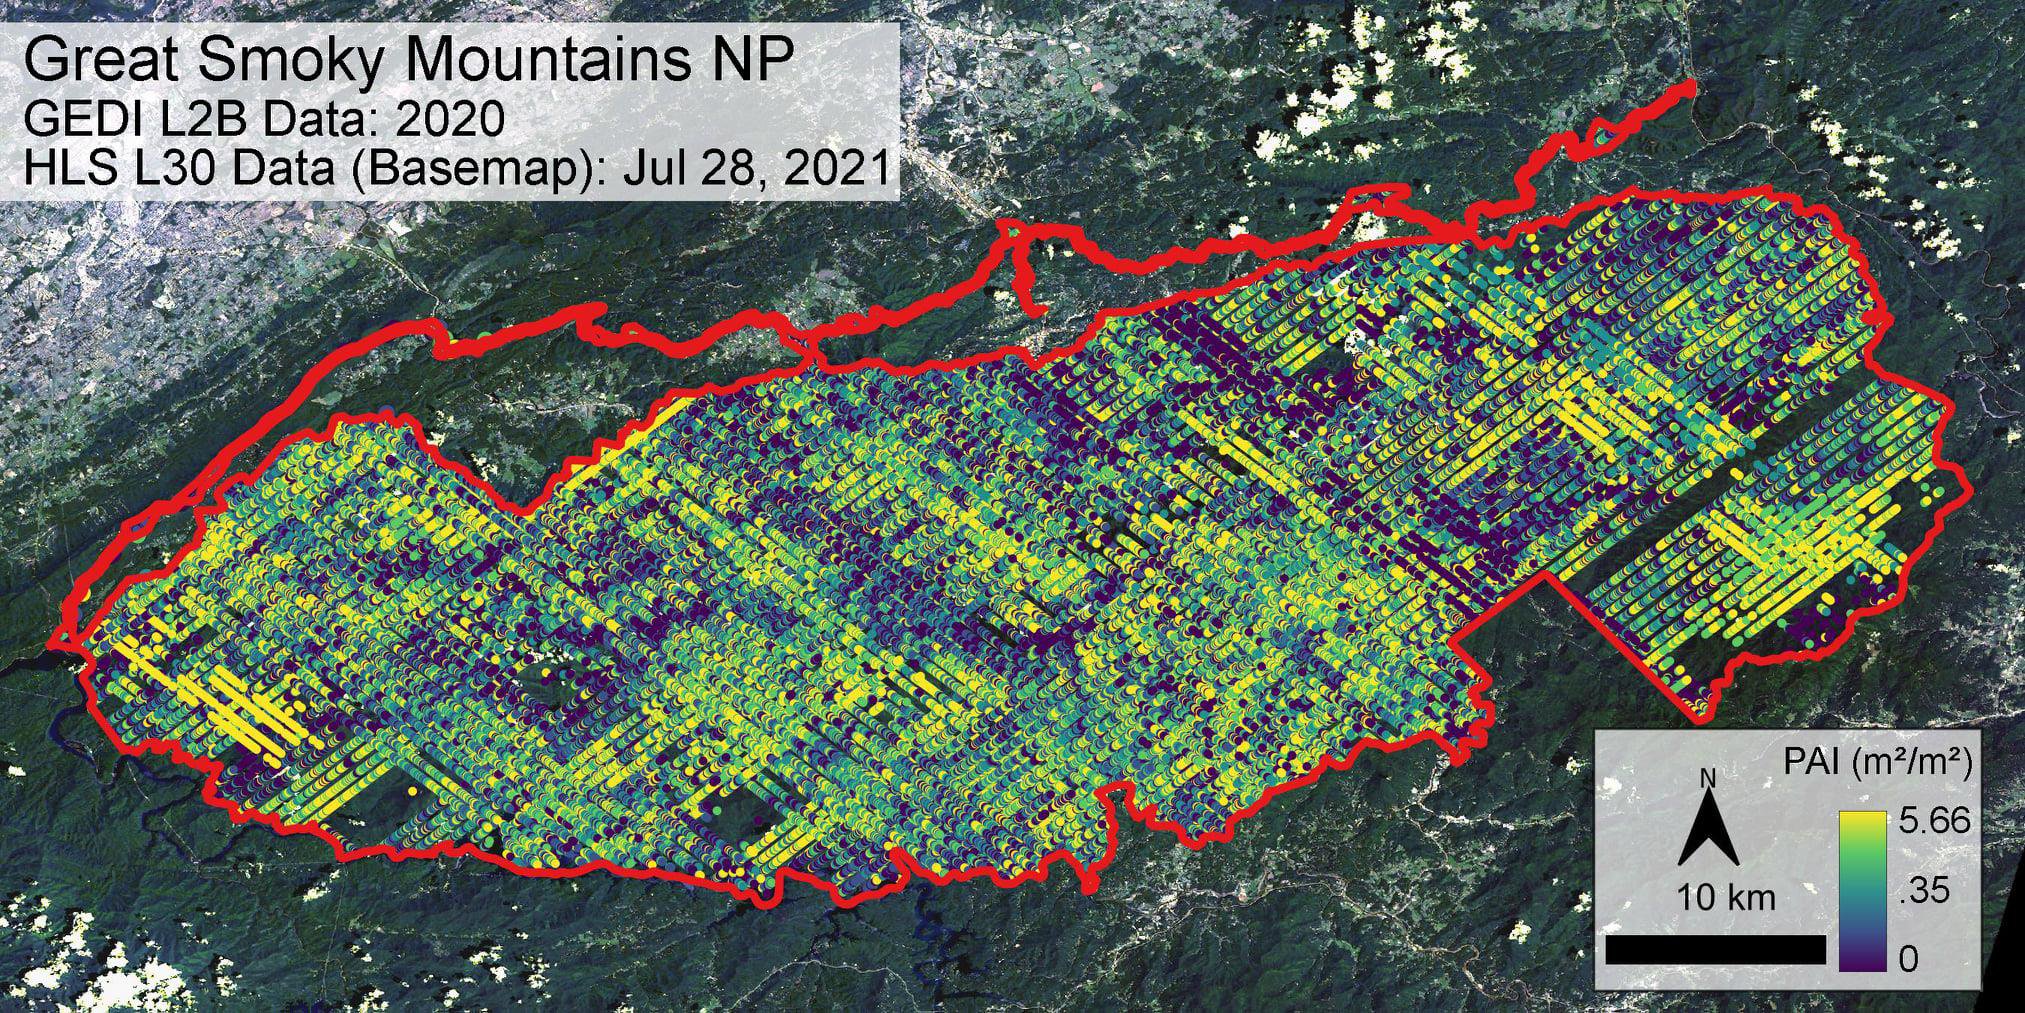 A map of the Great Smoky Mountains National Park showing GEDI data over the park. The park boundaries are highlighted in red, HLS data is used as a basemap. The image contains map elements of north arrow, scale bar, and legend..